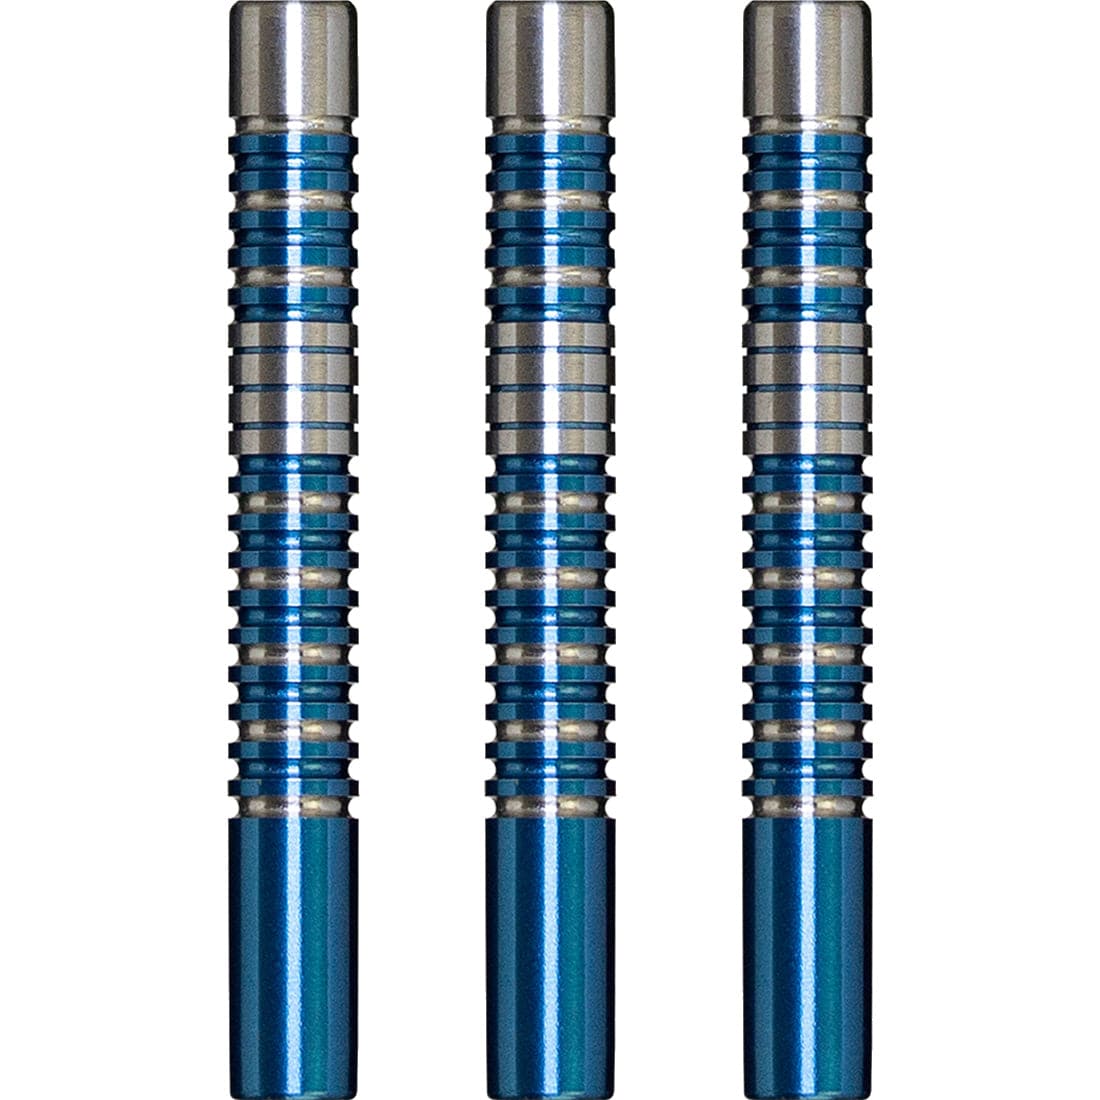 Cosmo Darts - Discovery Label - Soft Tip - Jeff Smith - Blue - 18g 18g